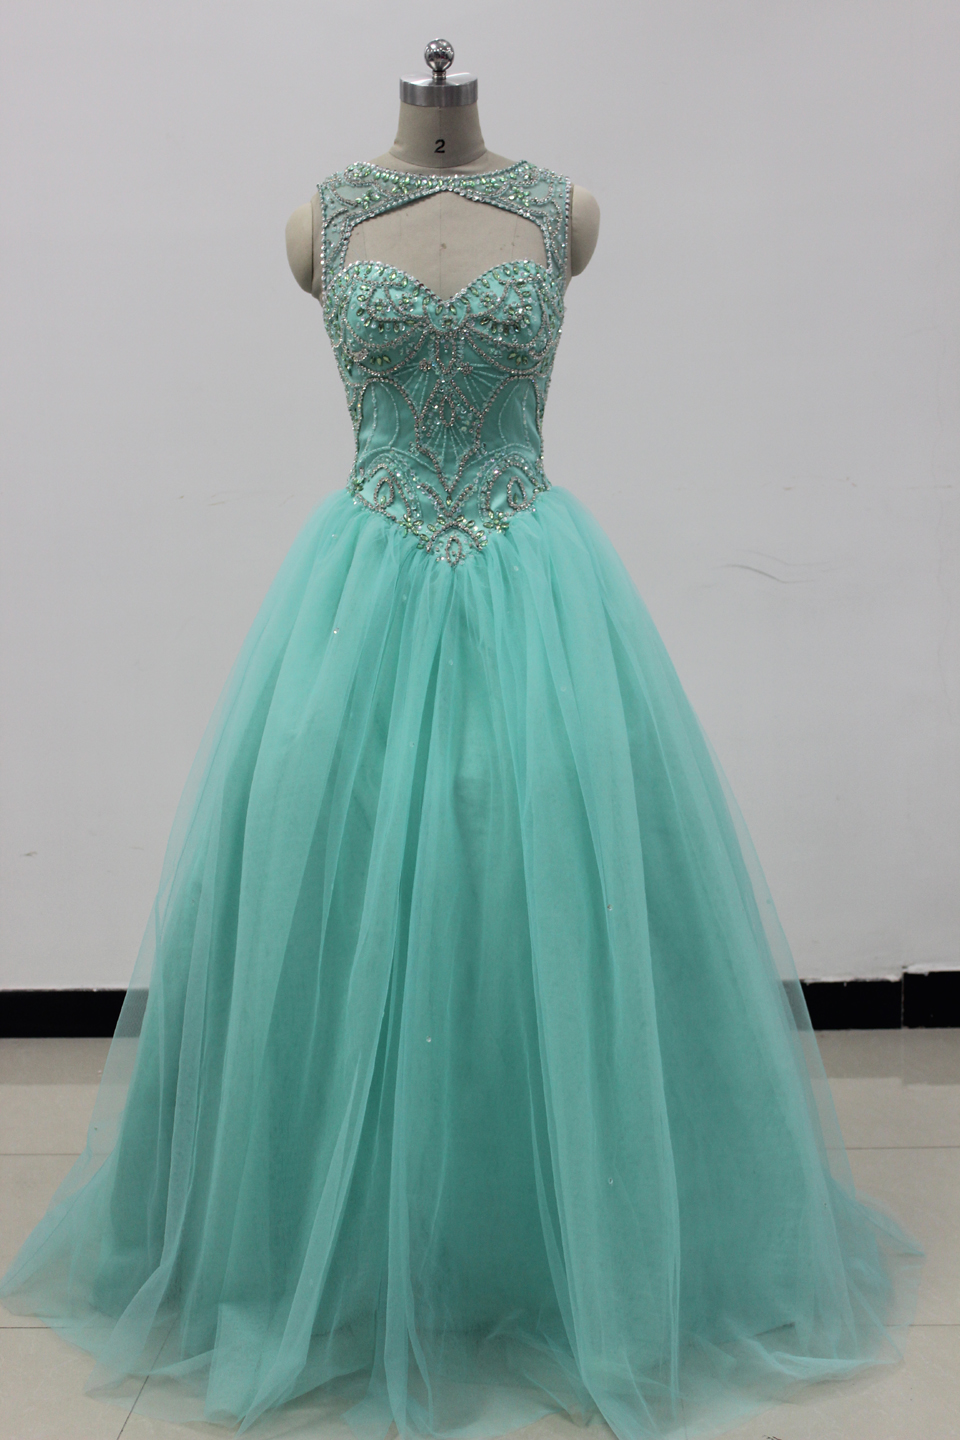 2019 Turquoise Tulle Evening Dress Beaded Quinceanera Dresses Ball Gown For 15 Prom Party Dress Custom Prom Gowns Sweet 16 Dresses